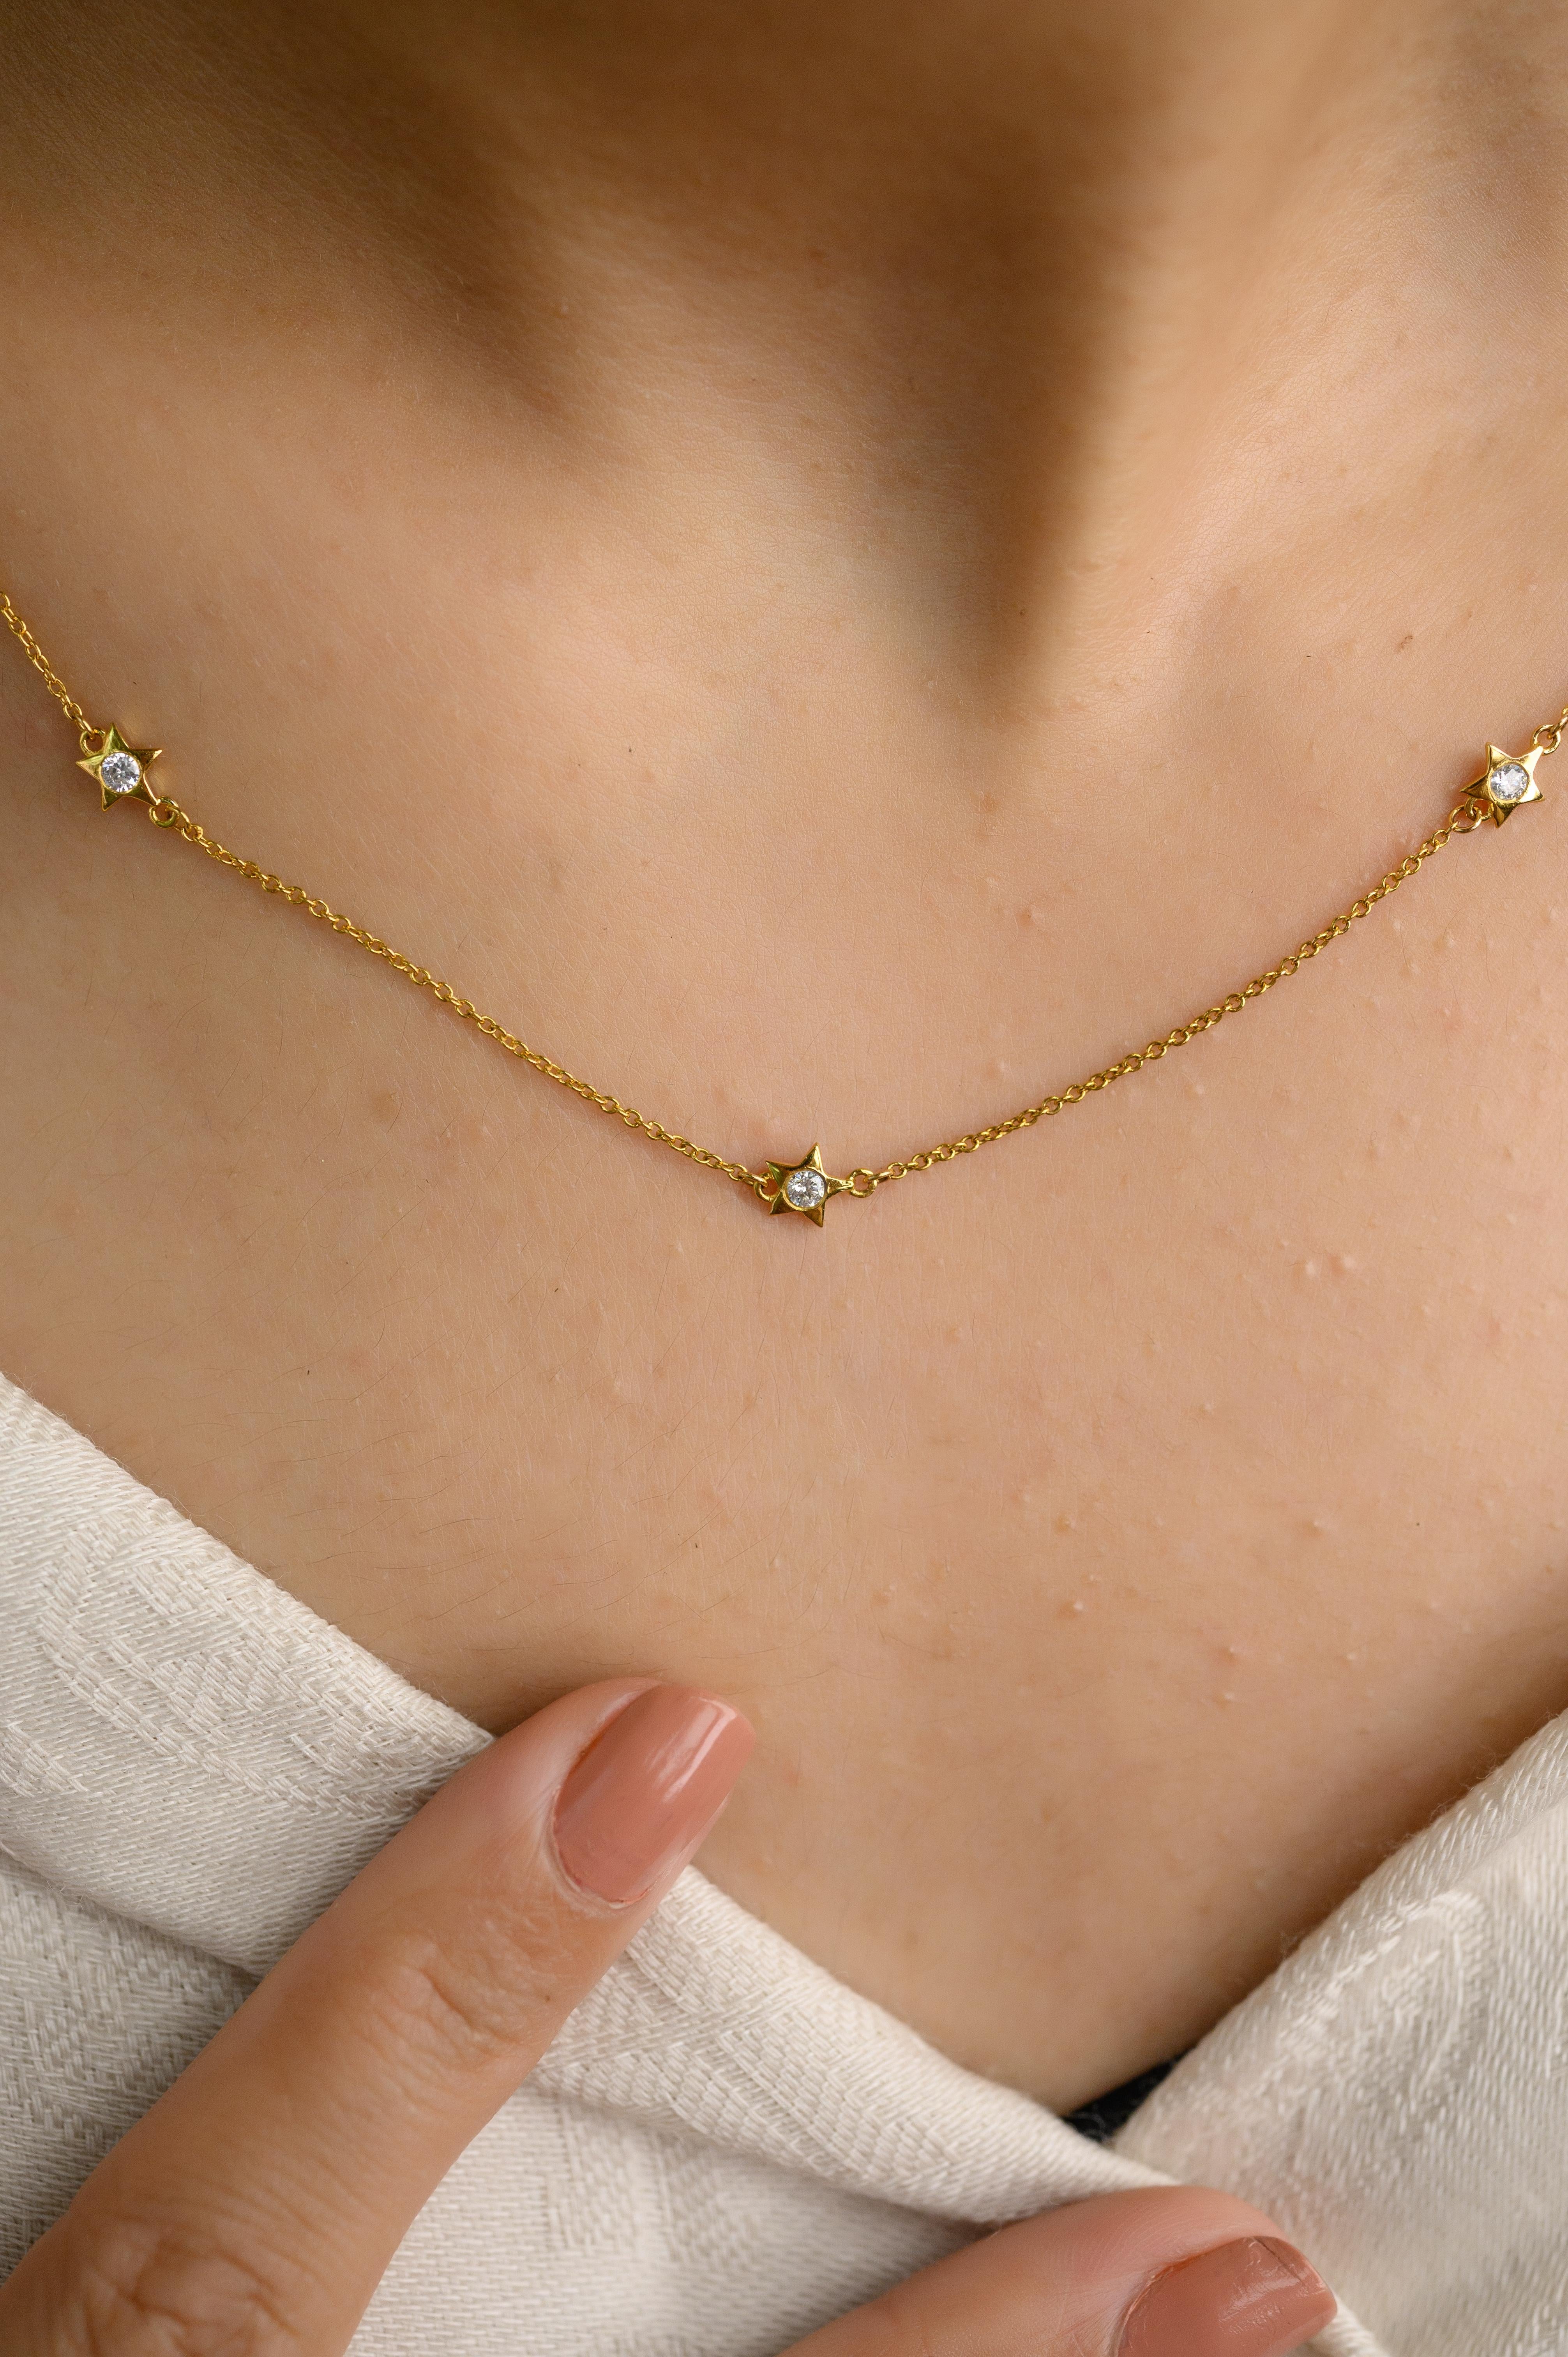 Dainty Diamond Star Chain Necklace in 14K Gold studded with round cut diamond. This stunning piece of jewelry instantly elevates a casual look or dressy outfit. 
April birthstone diamond brings love, fame, success and prosperity.
Designed with three